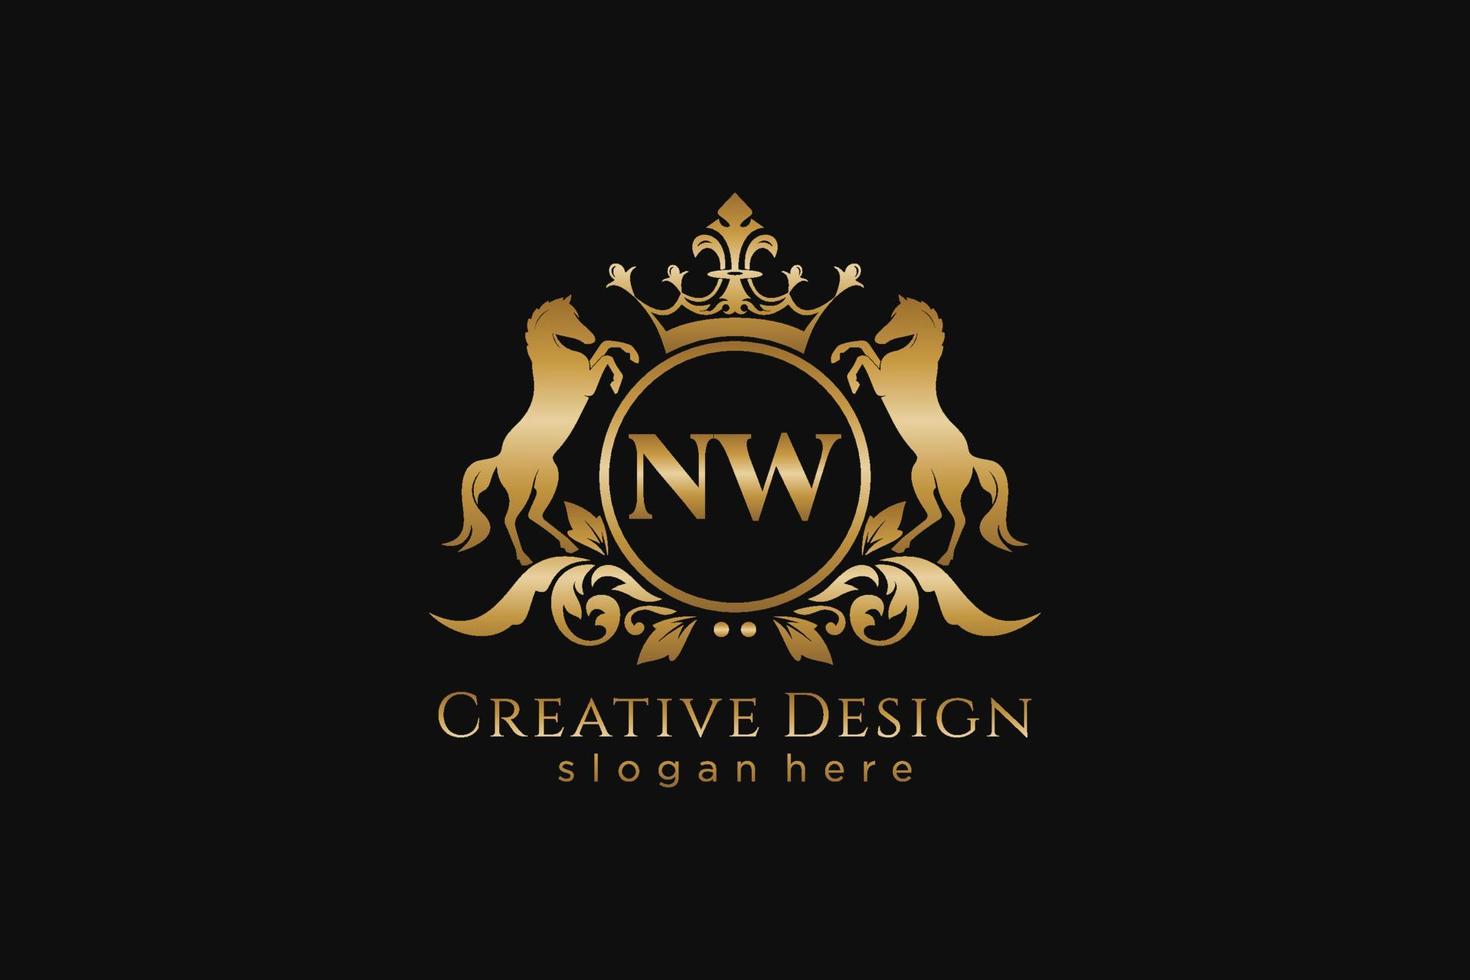 initial NW Retro golden crest with circle and two horses, badge template with scrolls and royal crown - perfect for luxurious branding projects vector